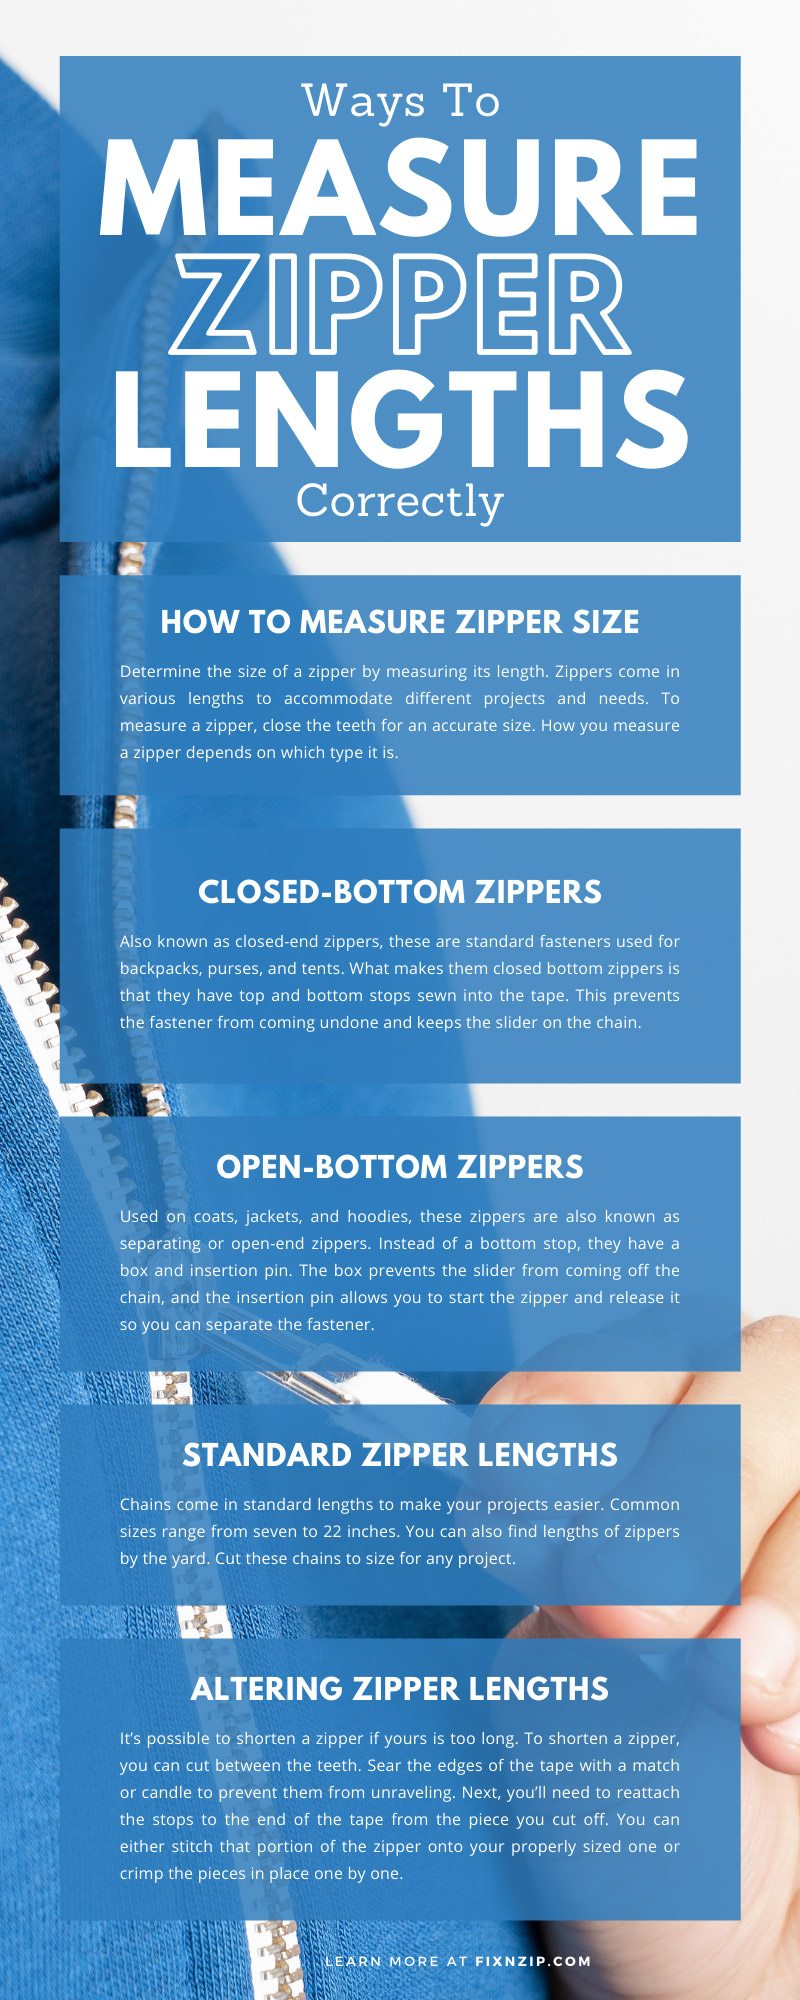 Ways To Measure Zipper Lengths Correctly